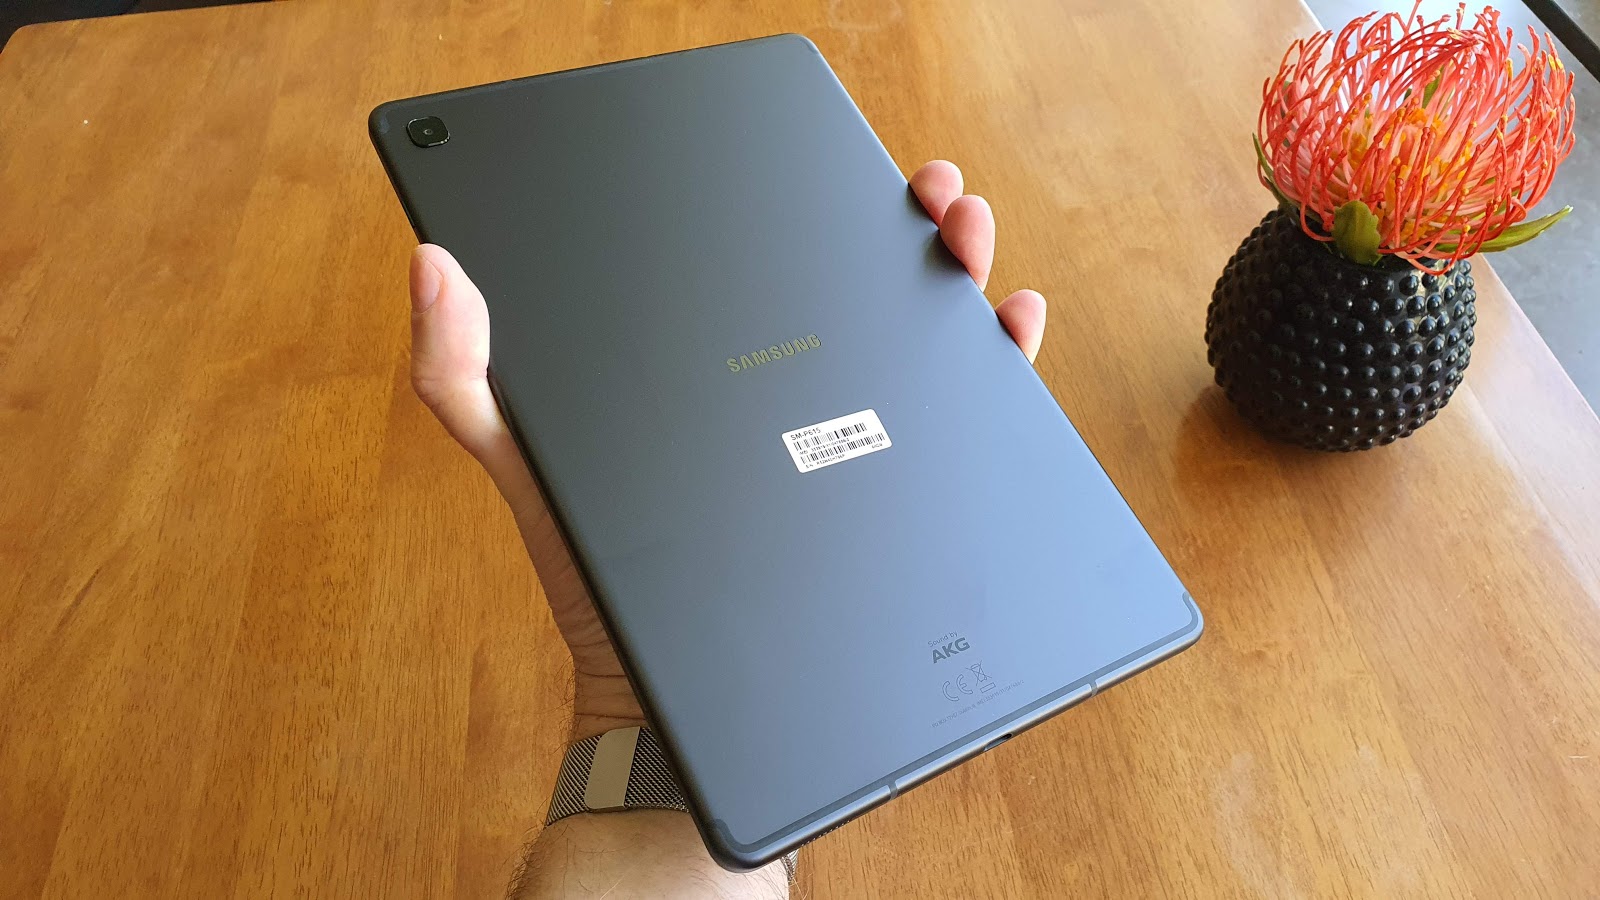 Unboxing of a Samsung Galaxy Tab S6 Lite in Oxford Gray